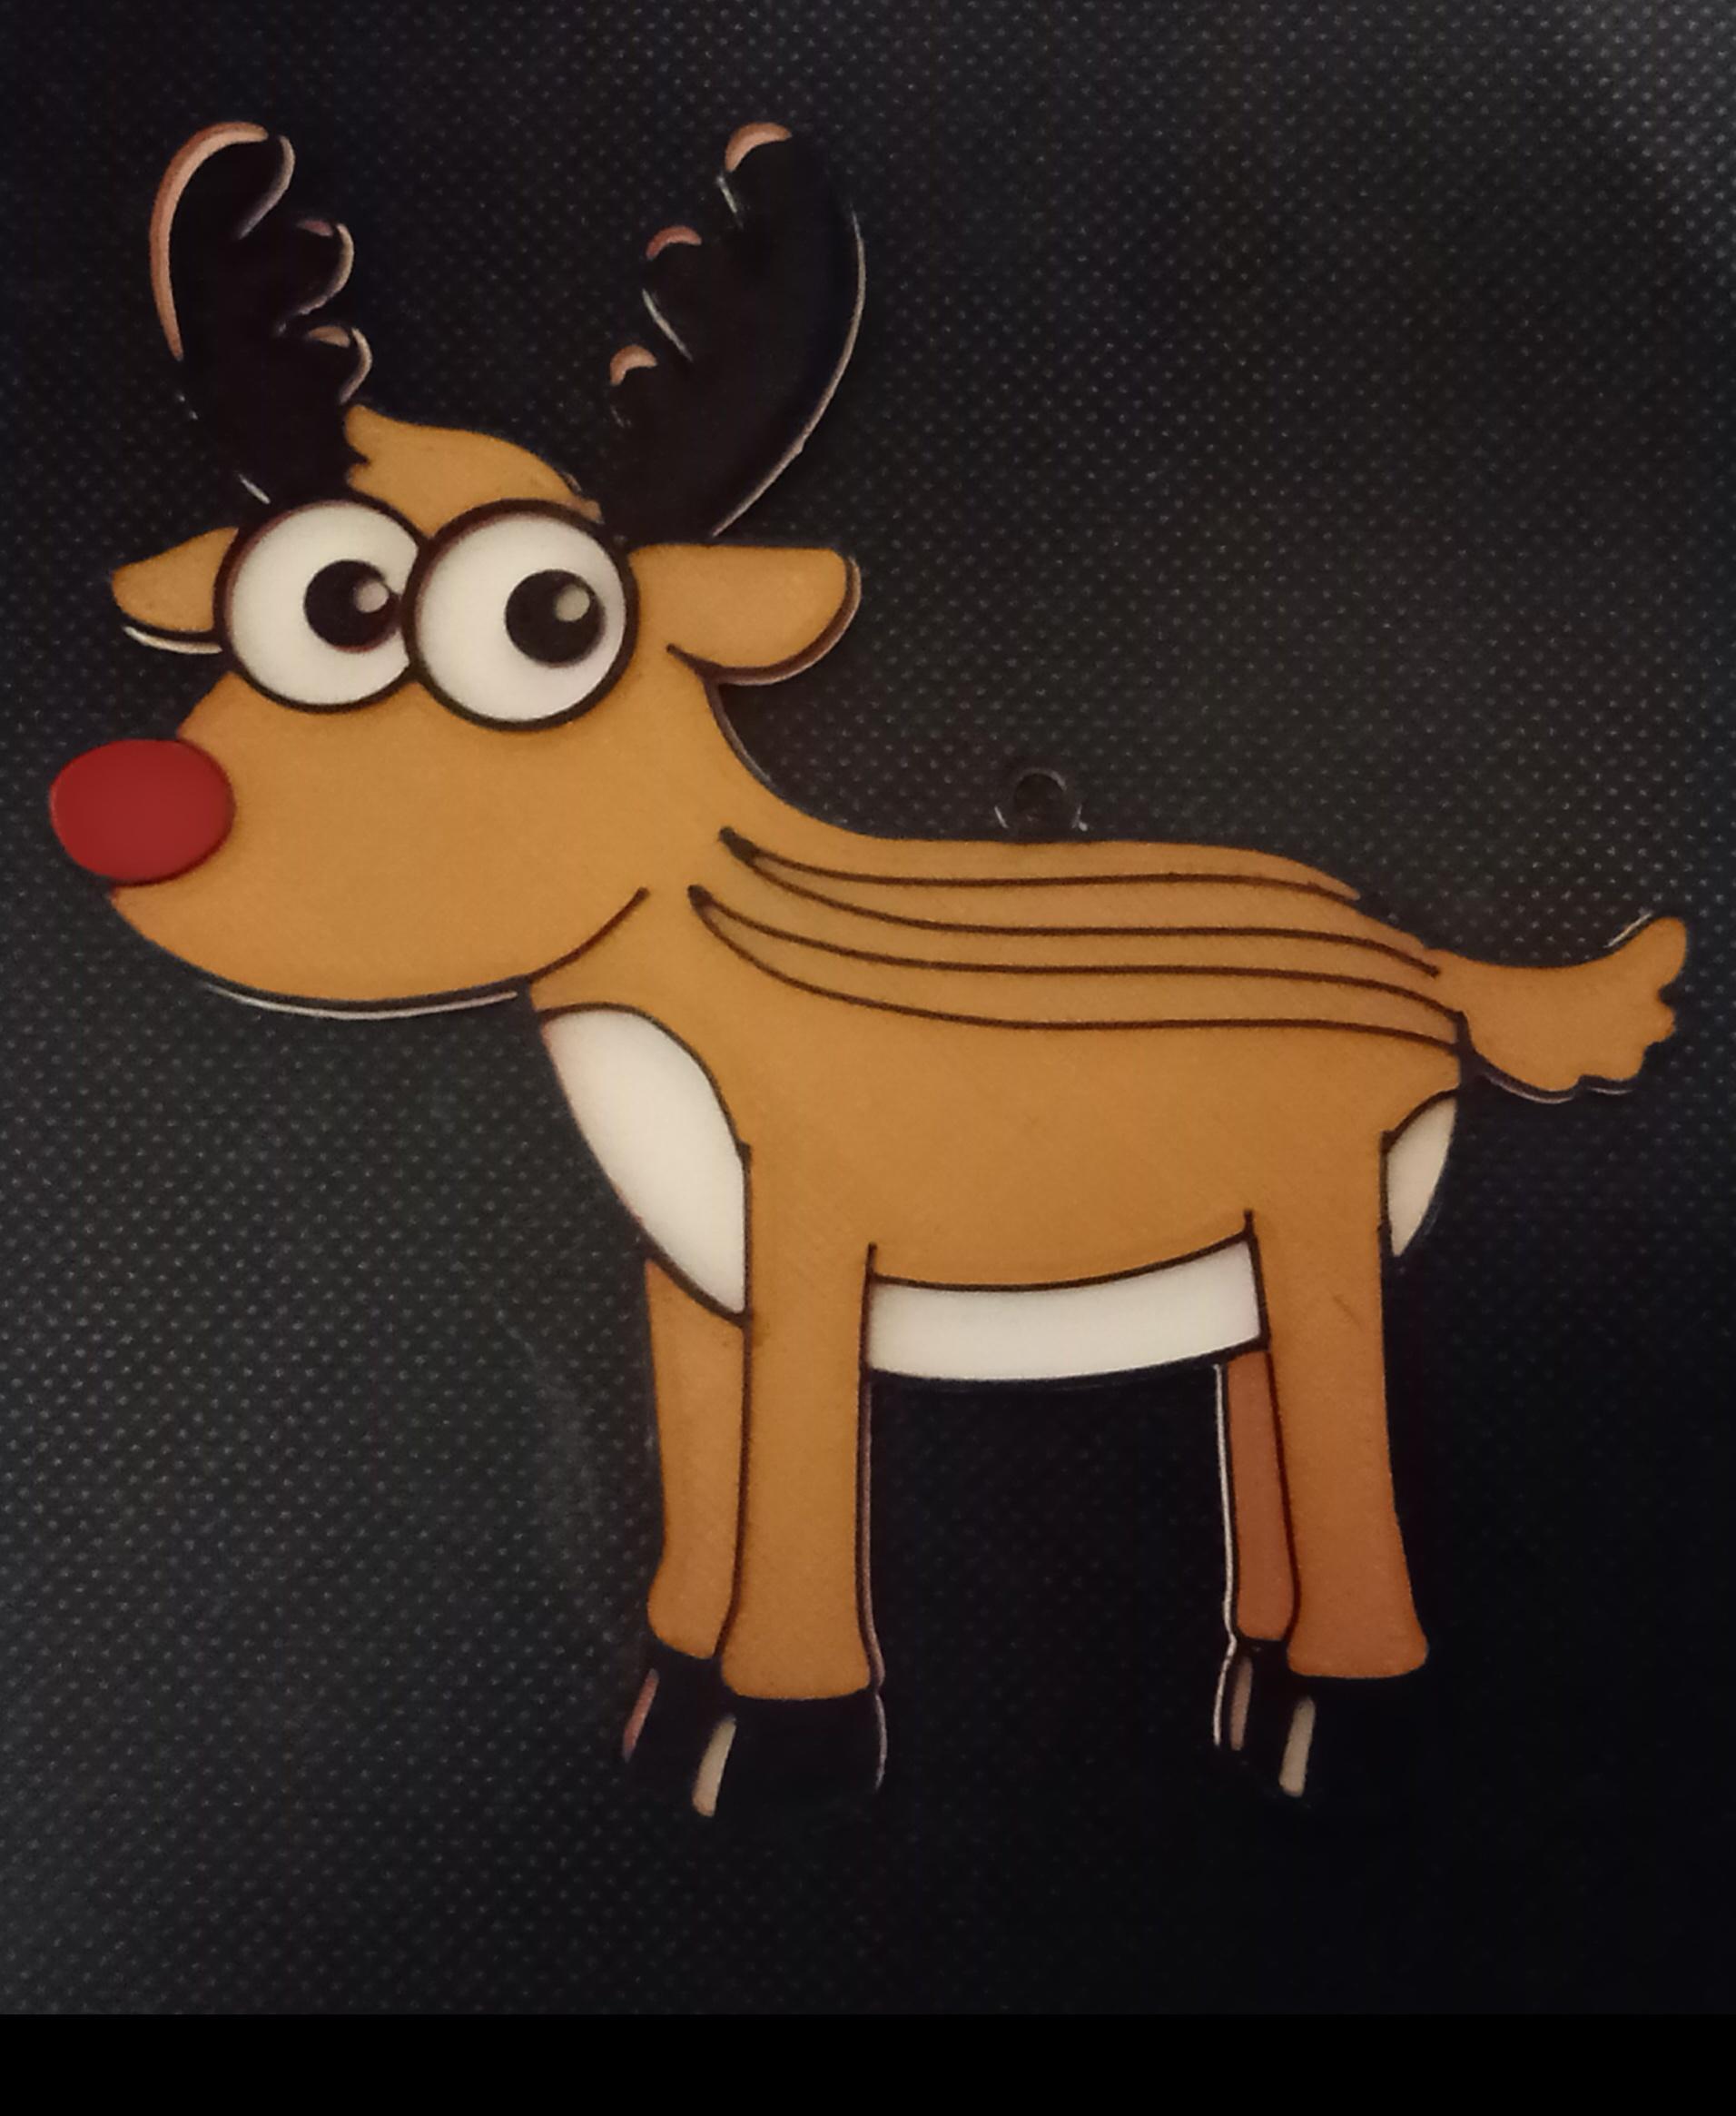 Rudolf Reindeer Christmas Ornament - multiprts - Made with ender 3 pro. Layer height 0.12
Beautiful model🤩 - 3d model